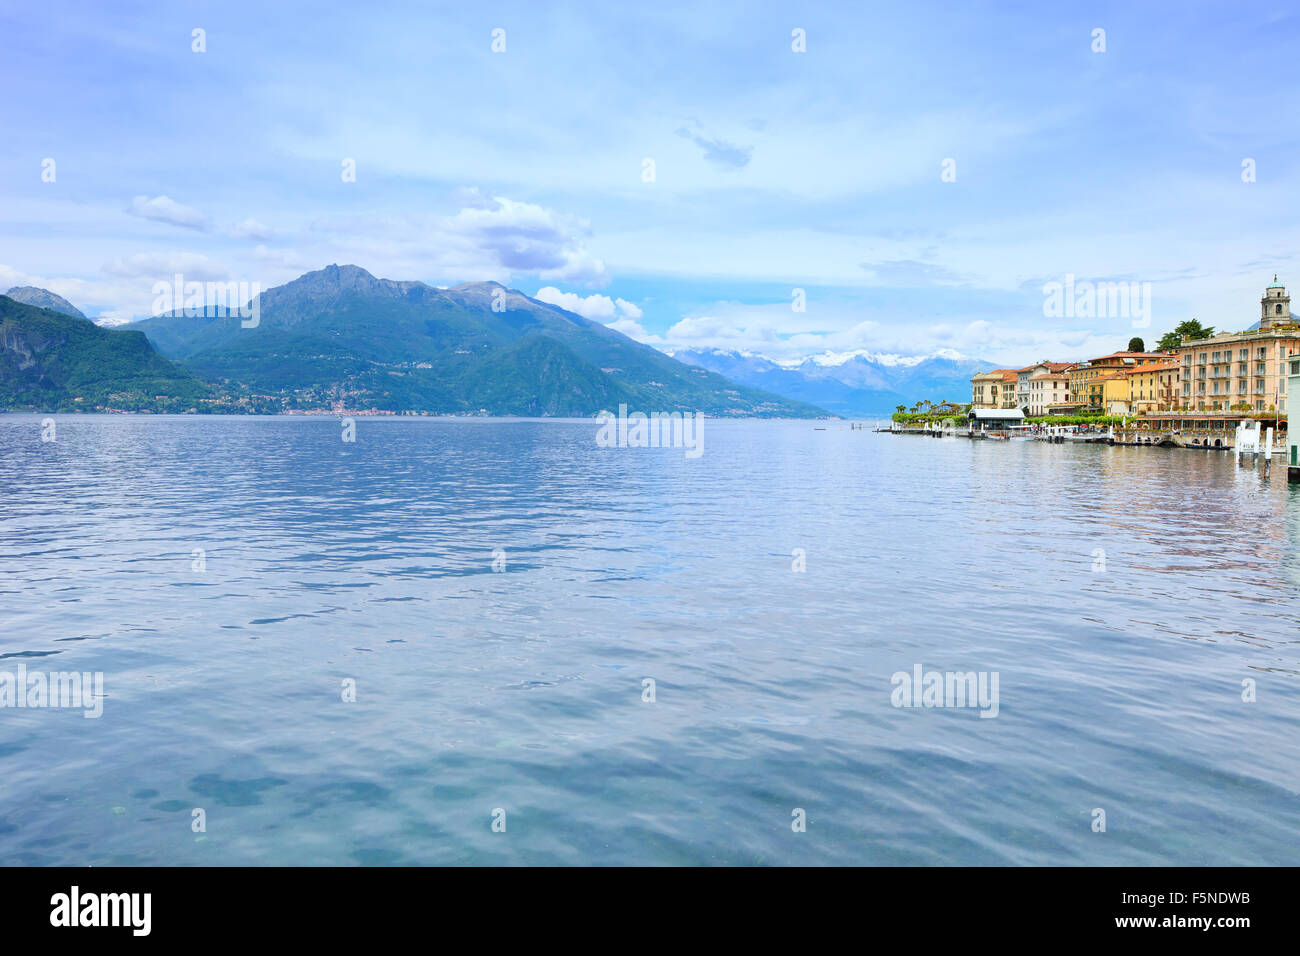 Bellagio town in Como lake district. Landscape with marina and italian traditional lake village. On background Alps mountains Stock Photo